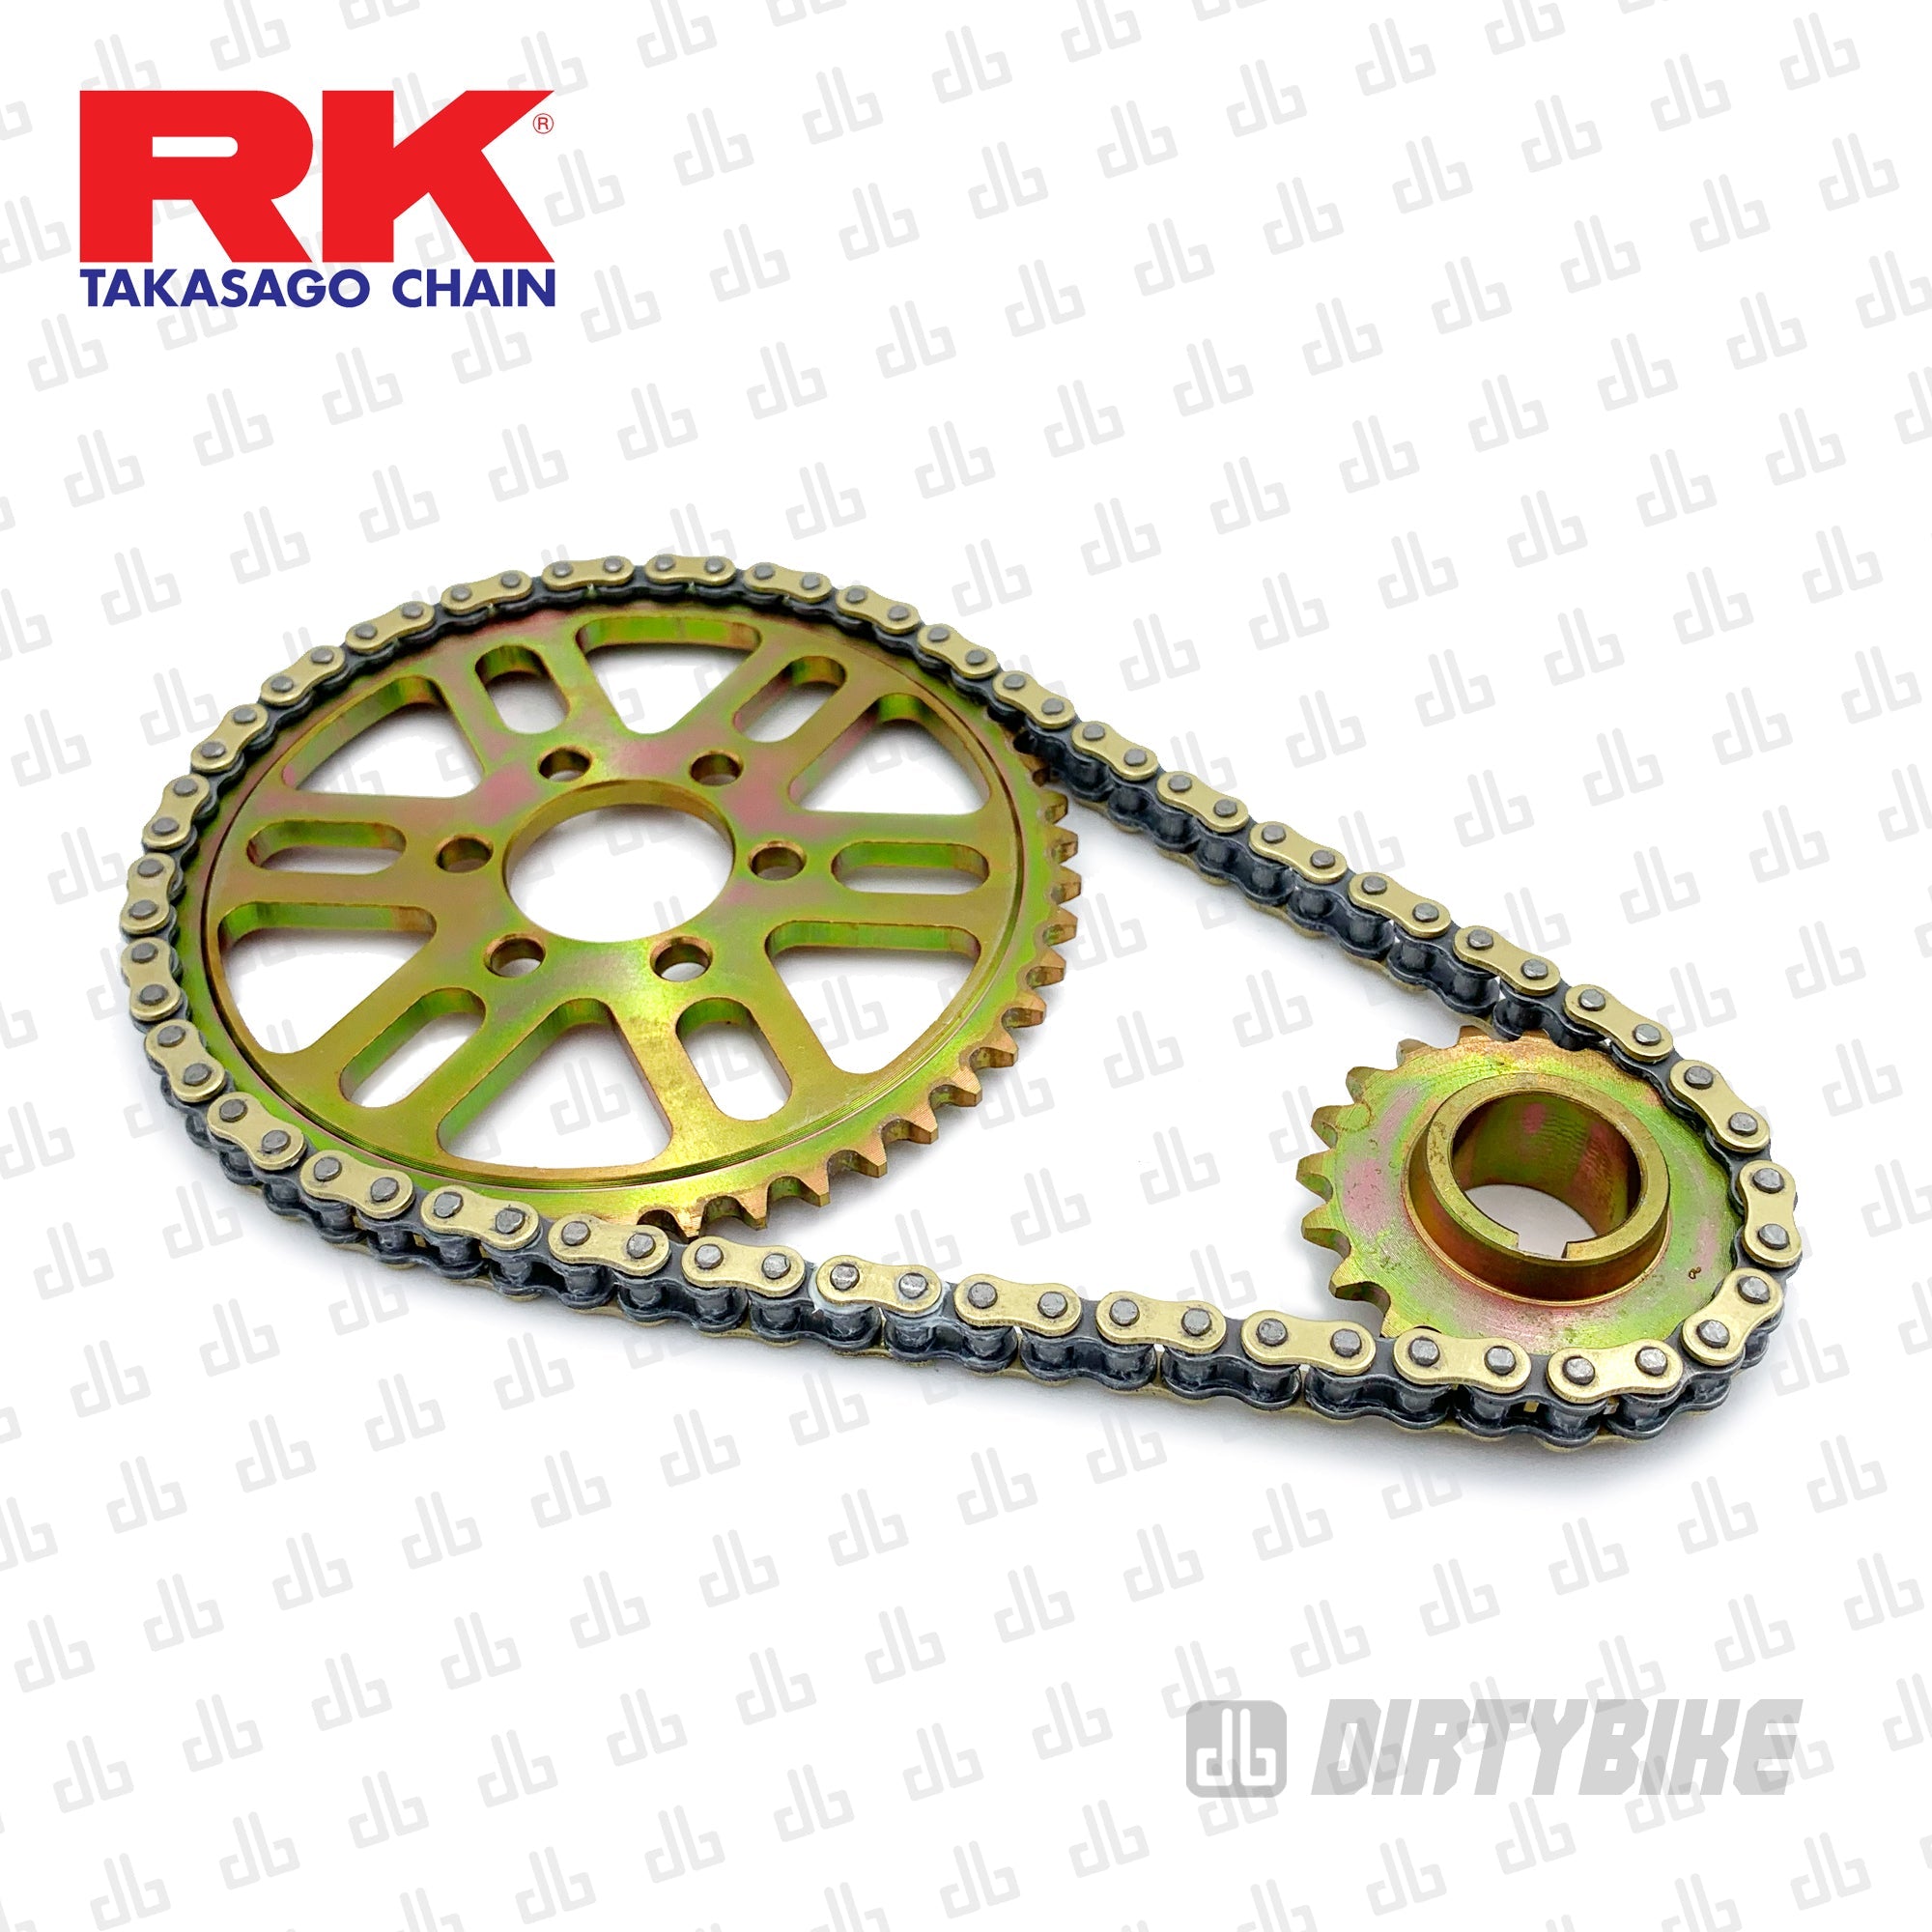 219RK Non-Sealed Chain Gold Series Primary Belt to Chain Conversion Kit (Surron LBX)